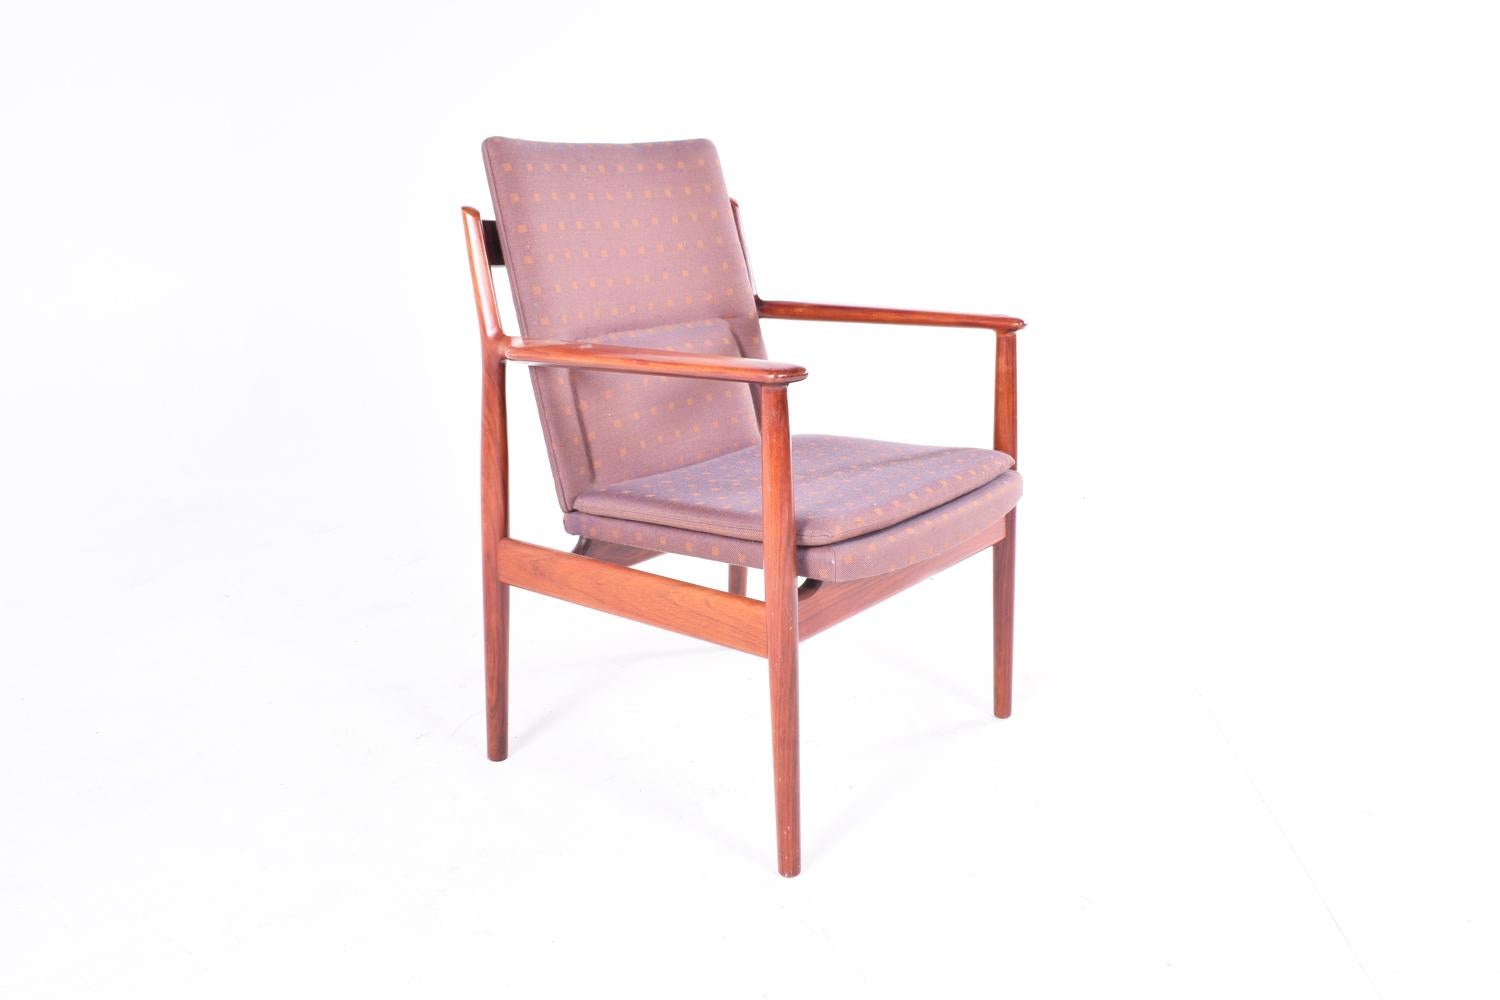 1960s Arne Vodder fabric and rosewood armchair with solid rosewood frame and original fabric upholstery. Renewed rosewood frame. Fabric in good condition. Manufactured by Sibast Furniture, model 431.